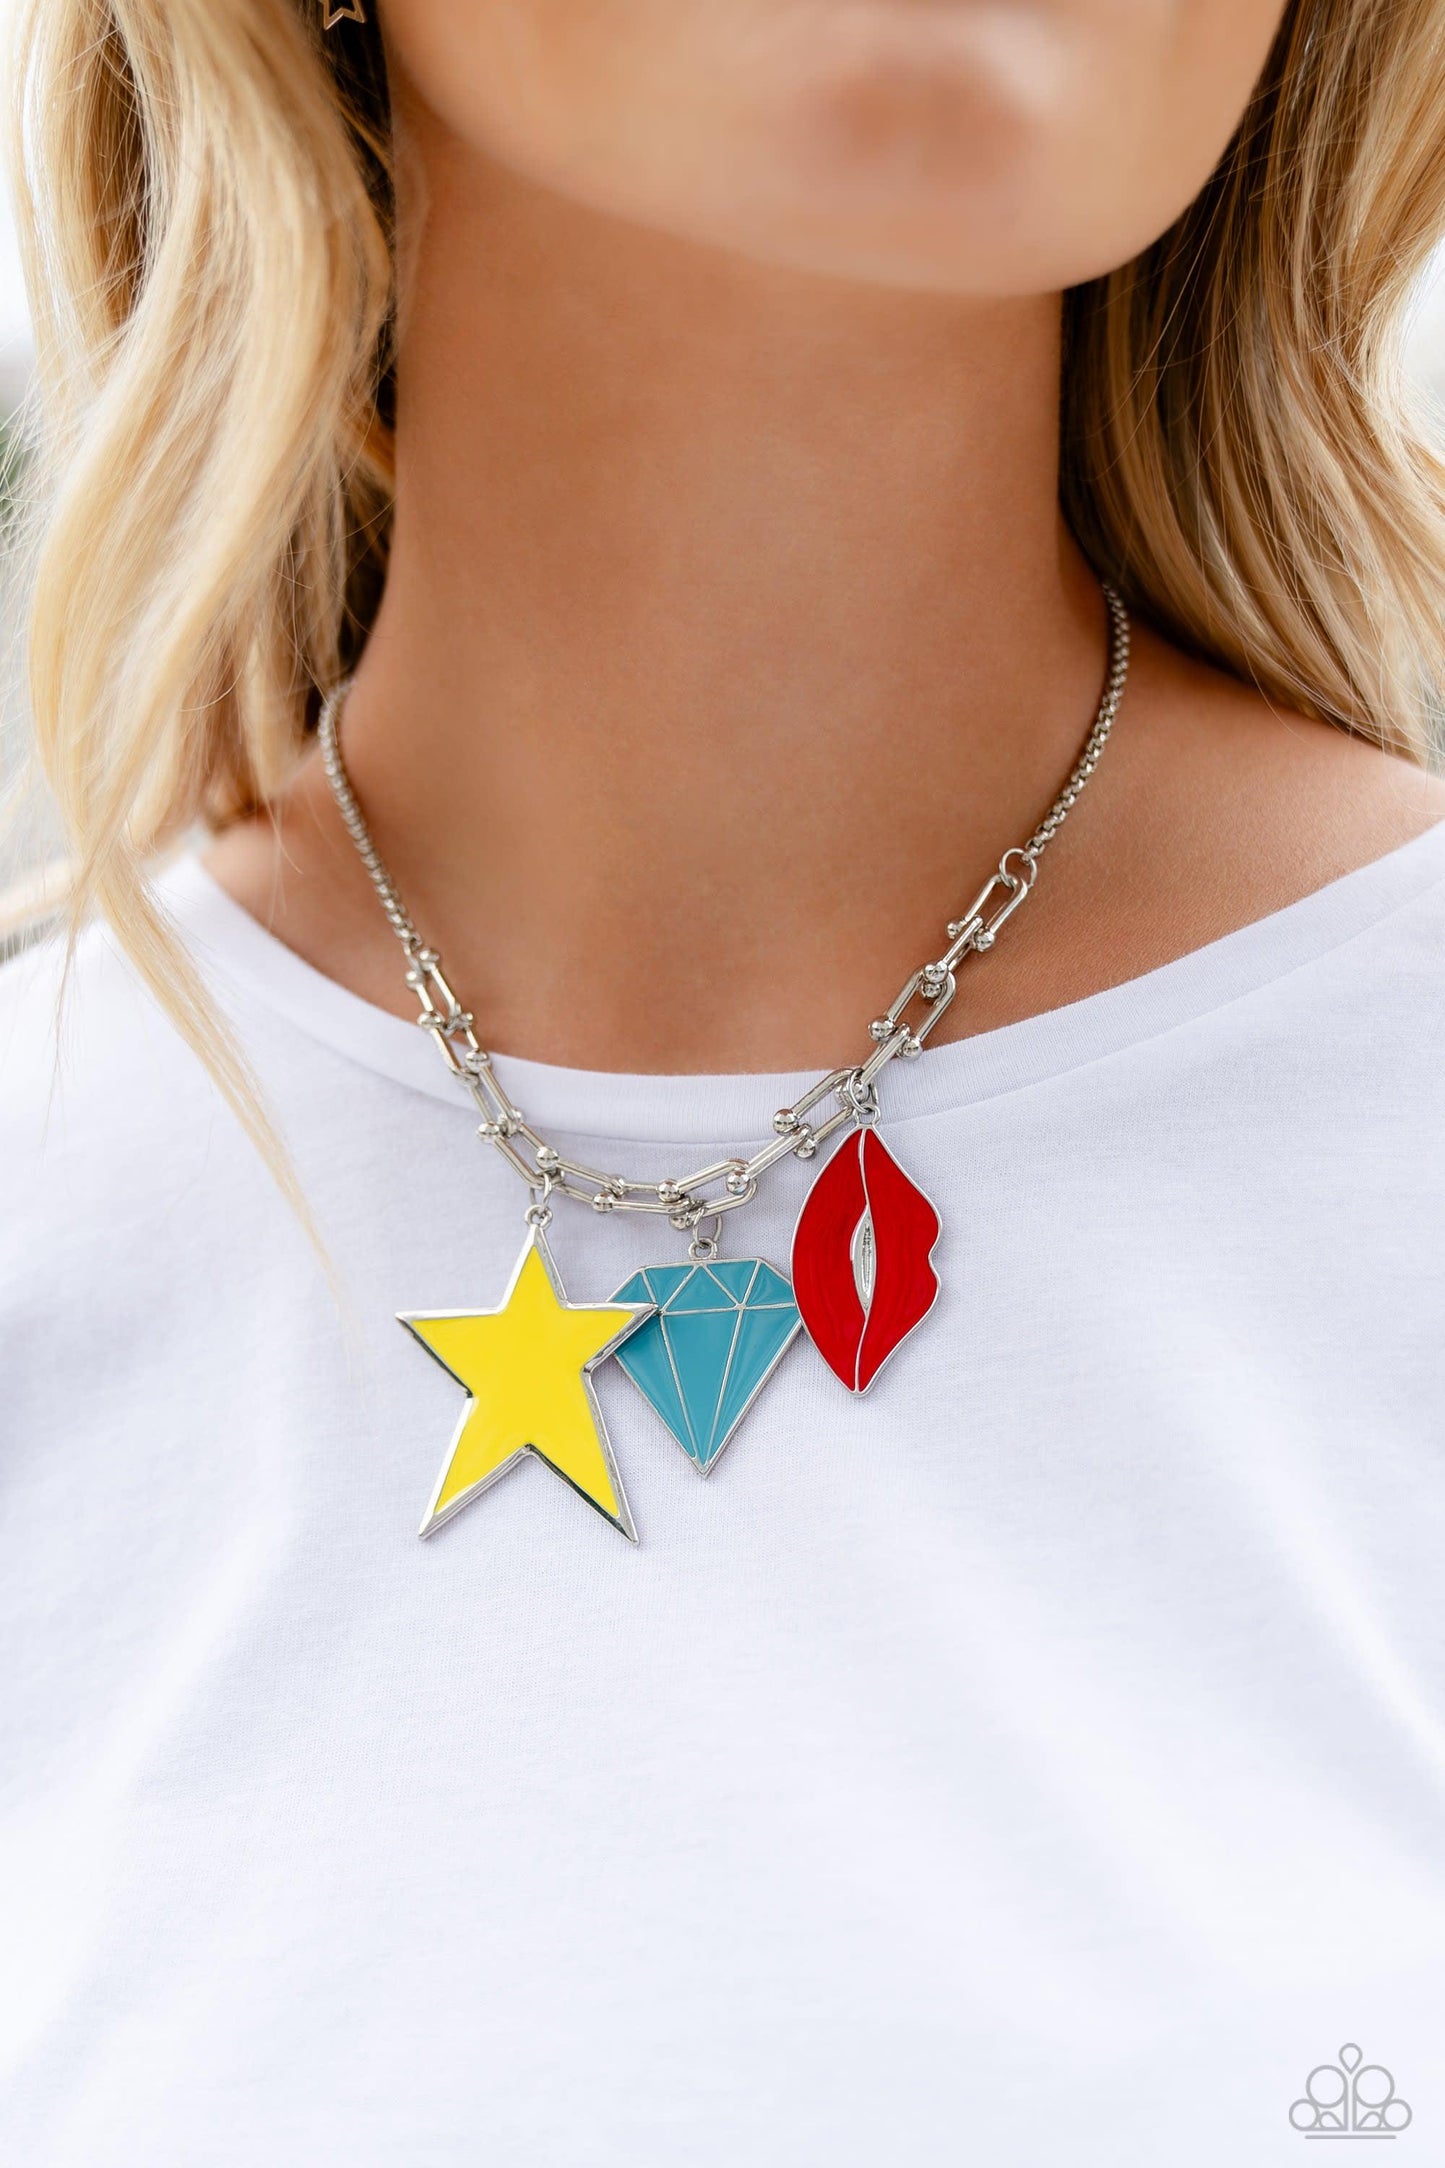 Paparazzi Accessories - Scouting Shapes - Multicolor Necklace - Bling by JessieK